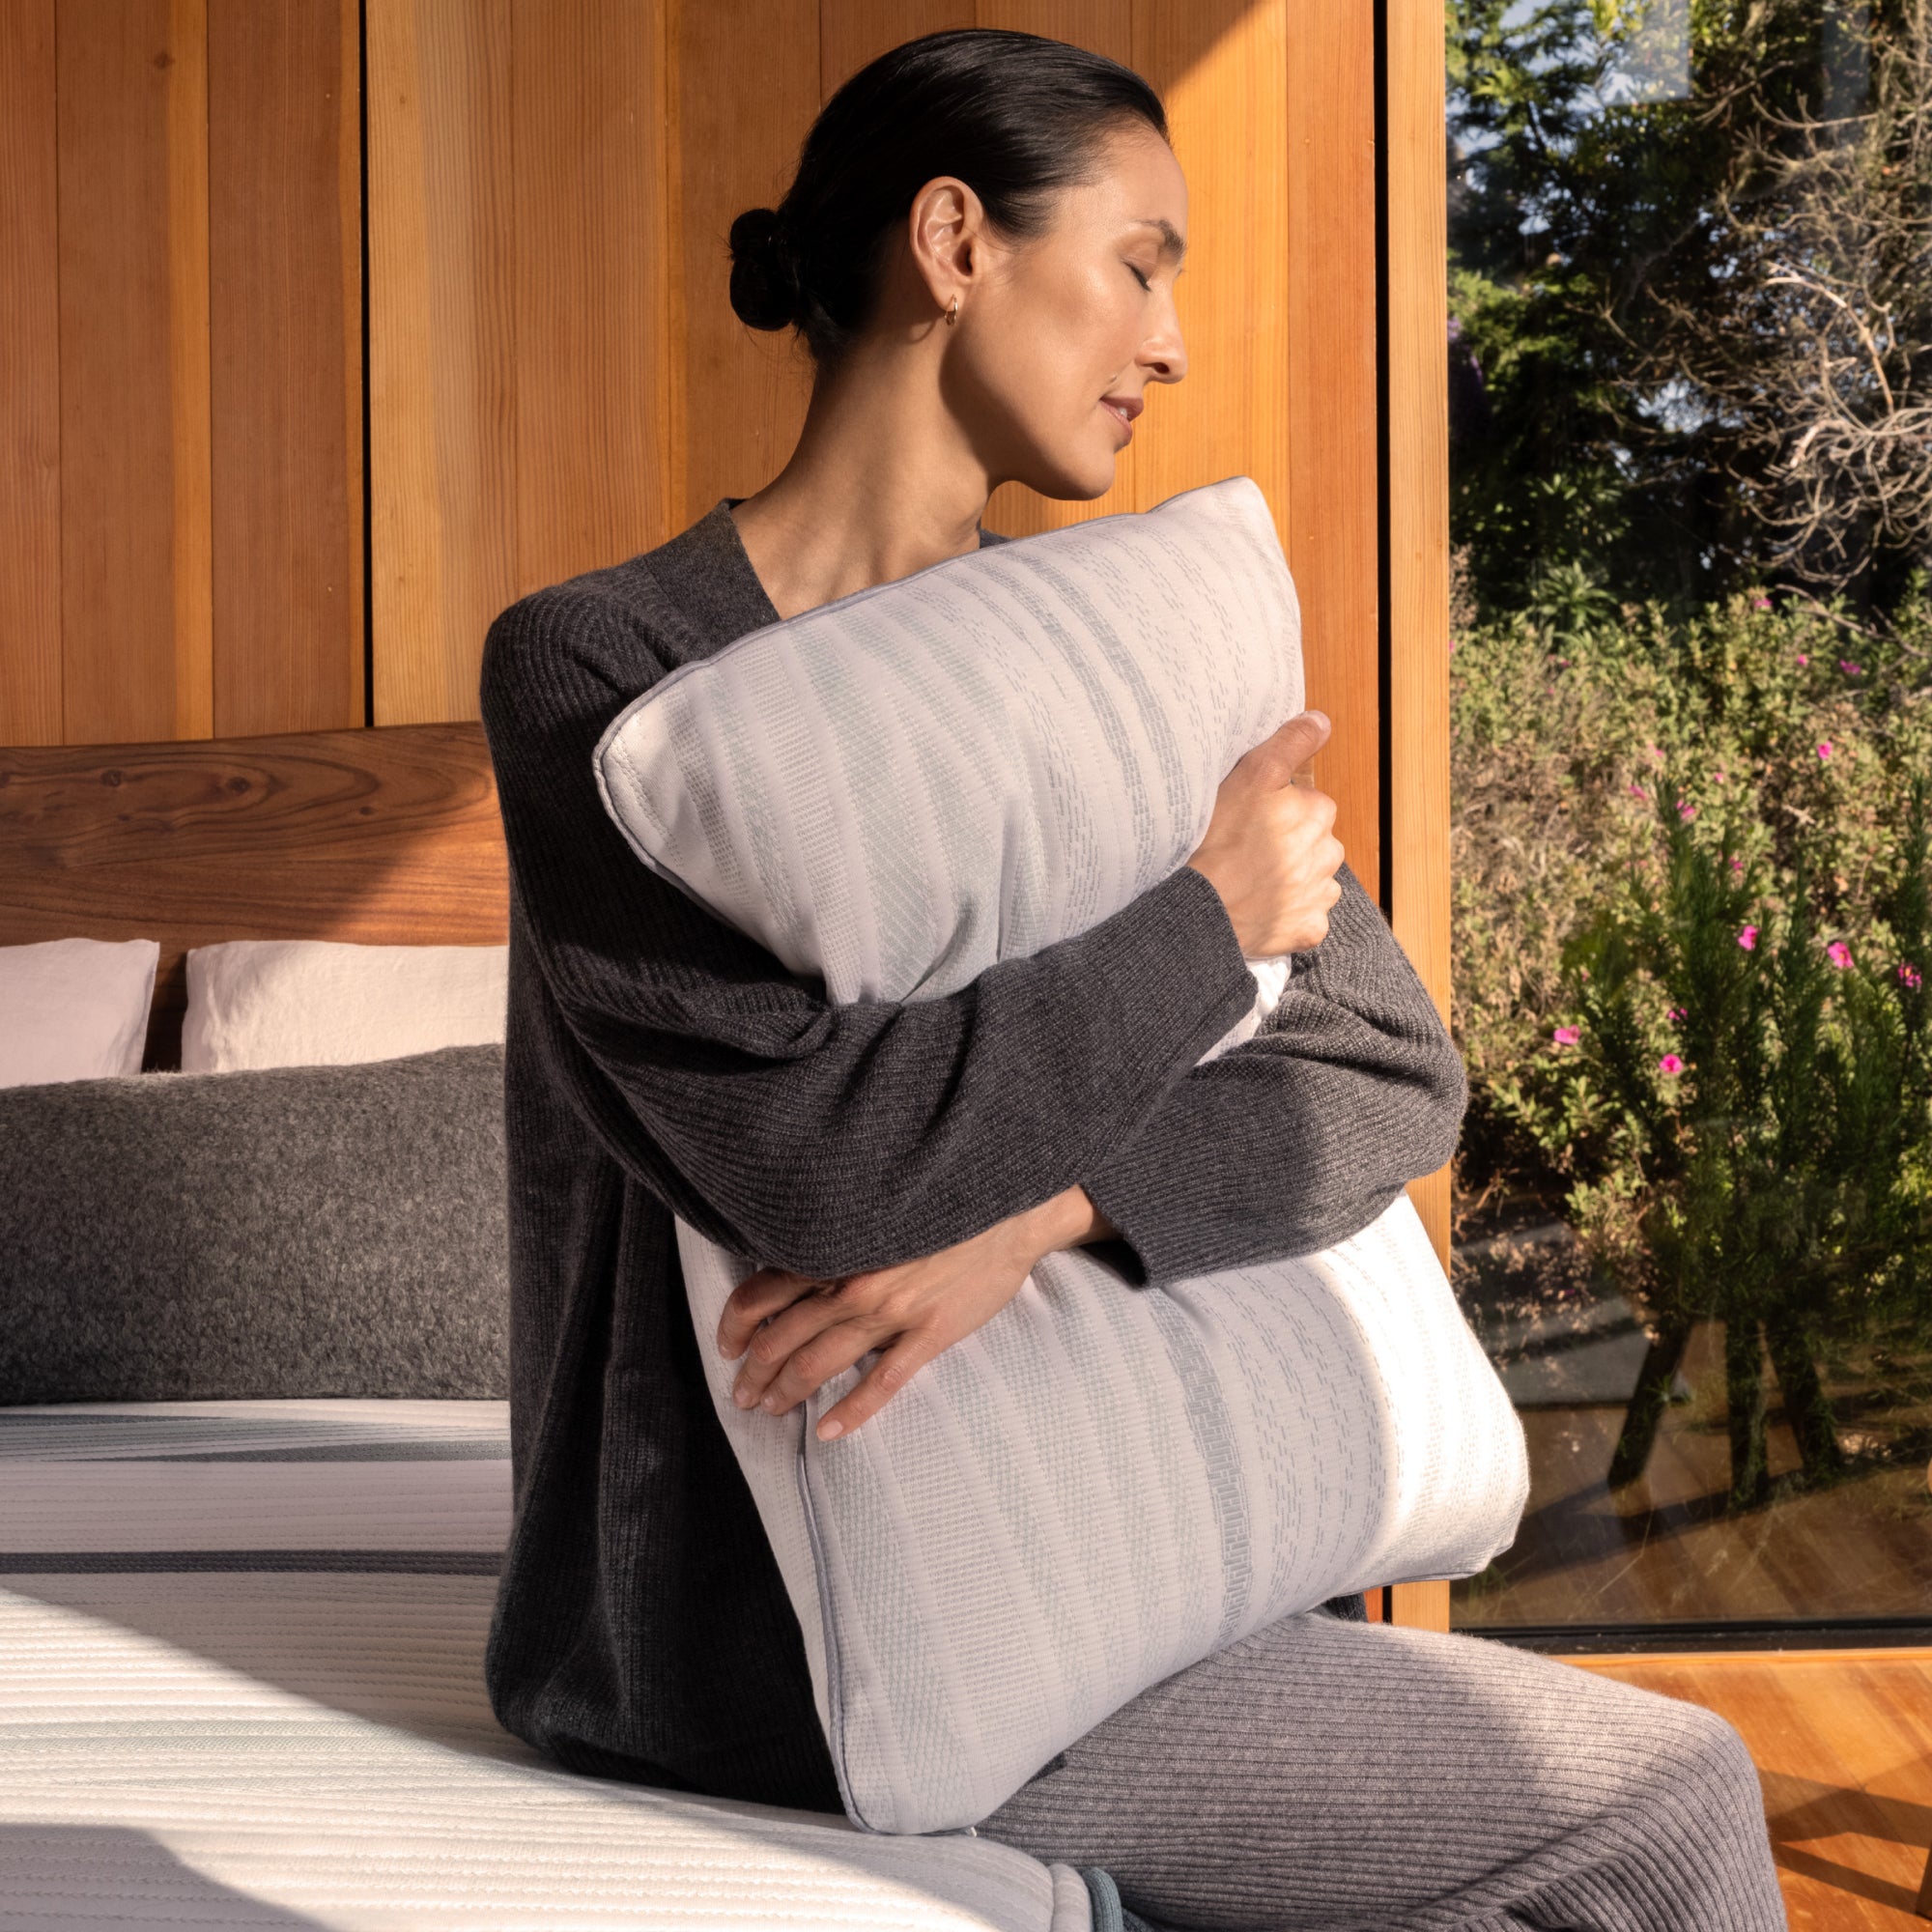 A woman squeezing the Beautyrest Harmony Lux pillow